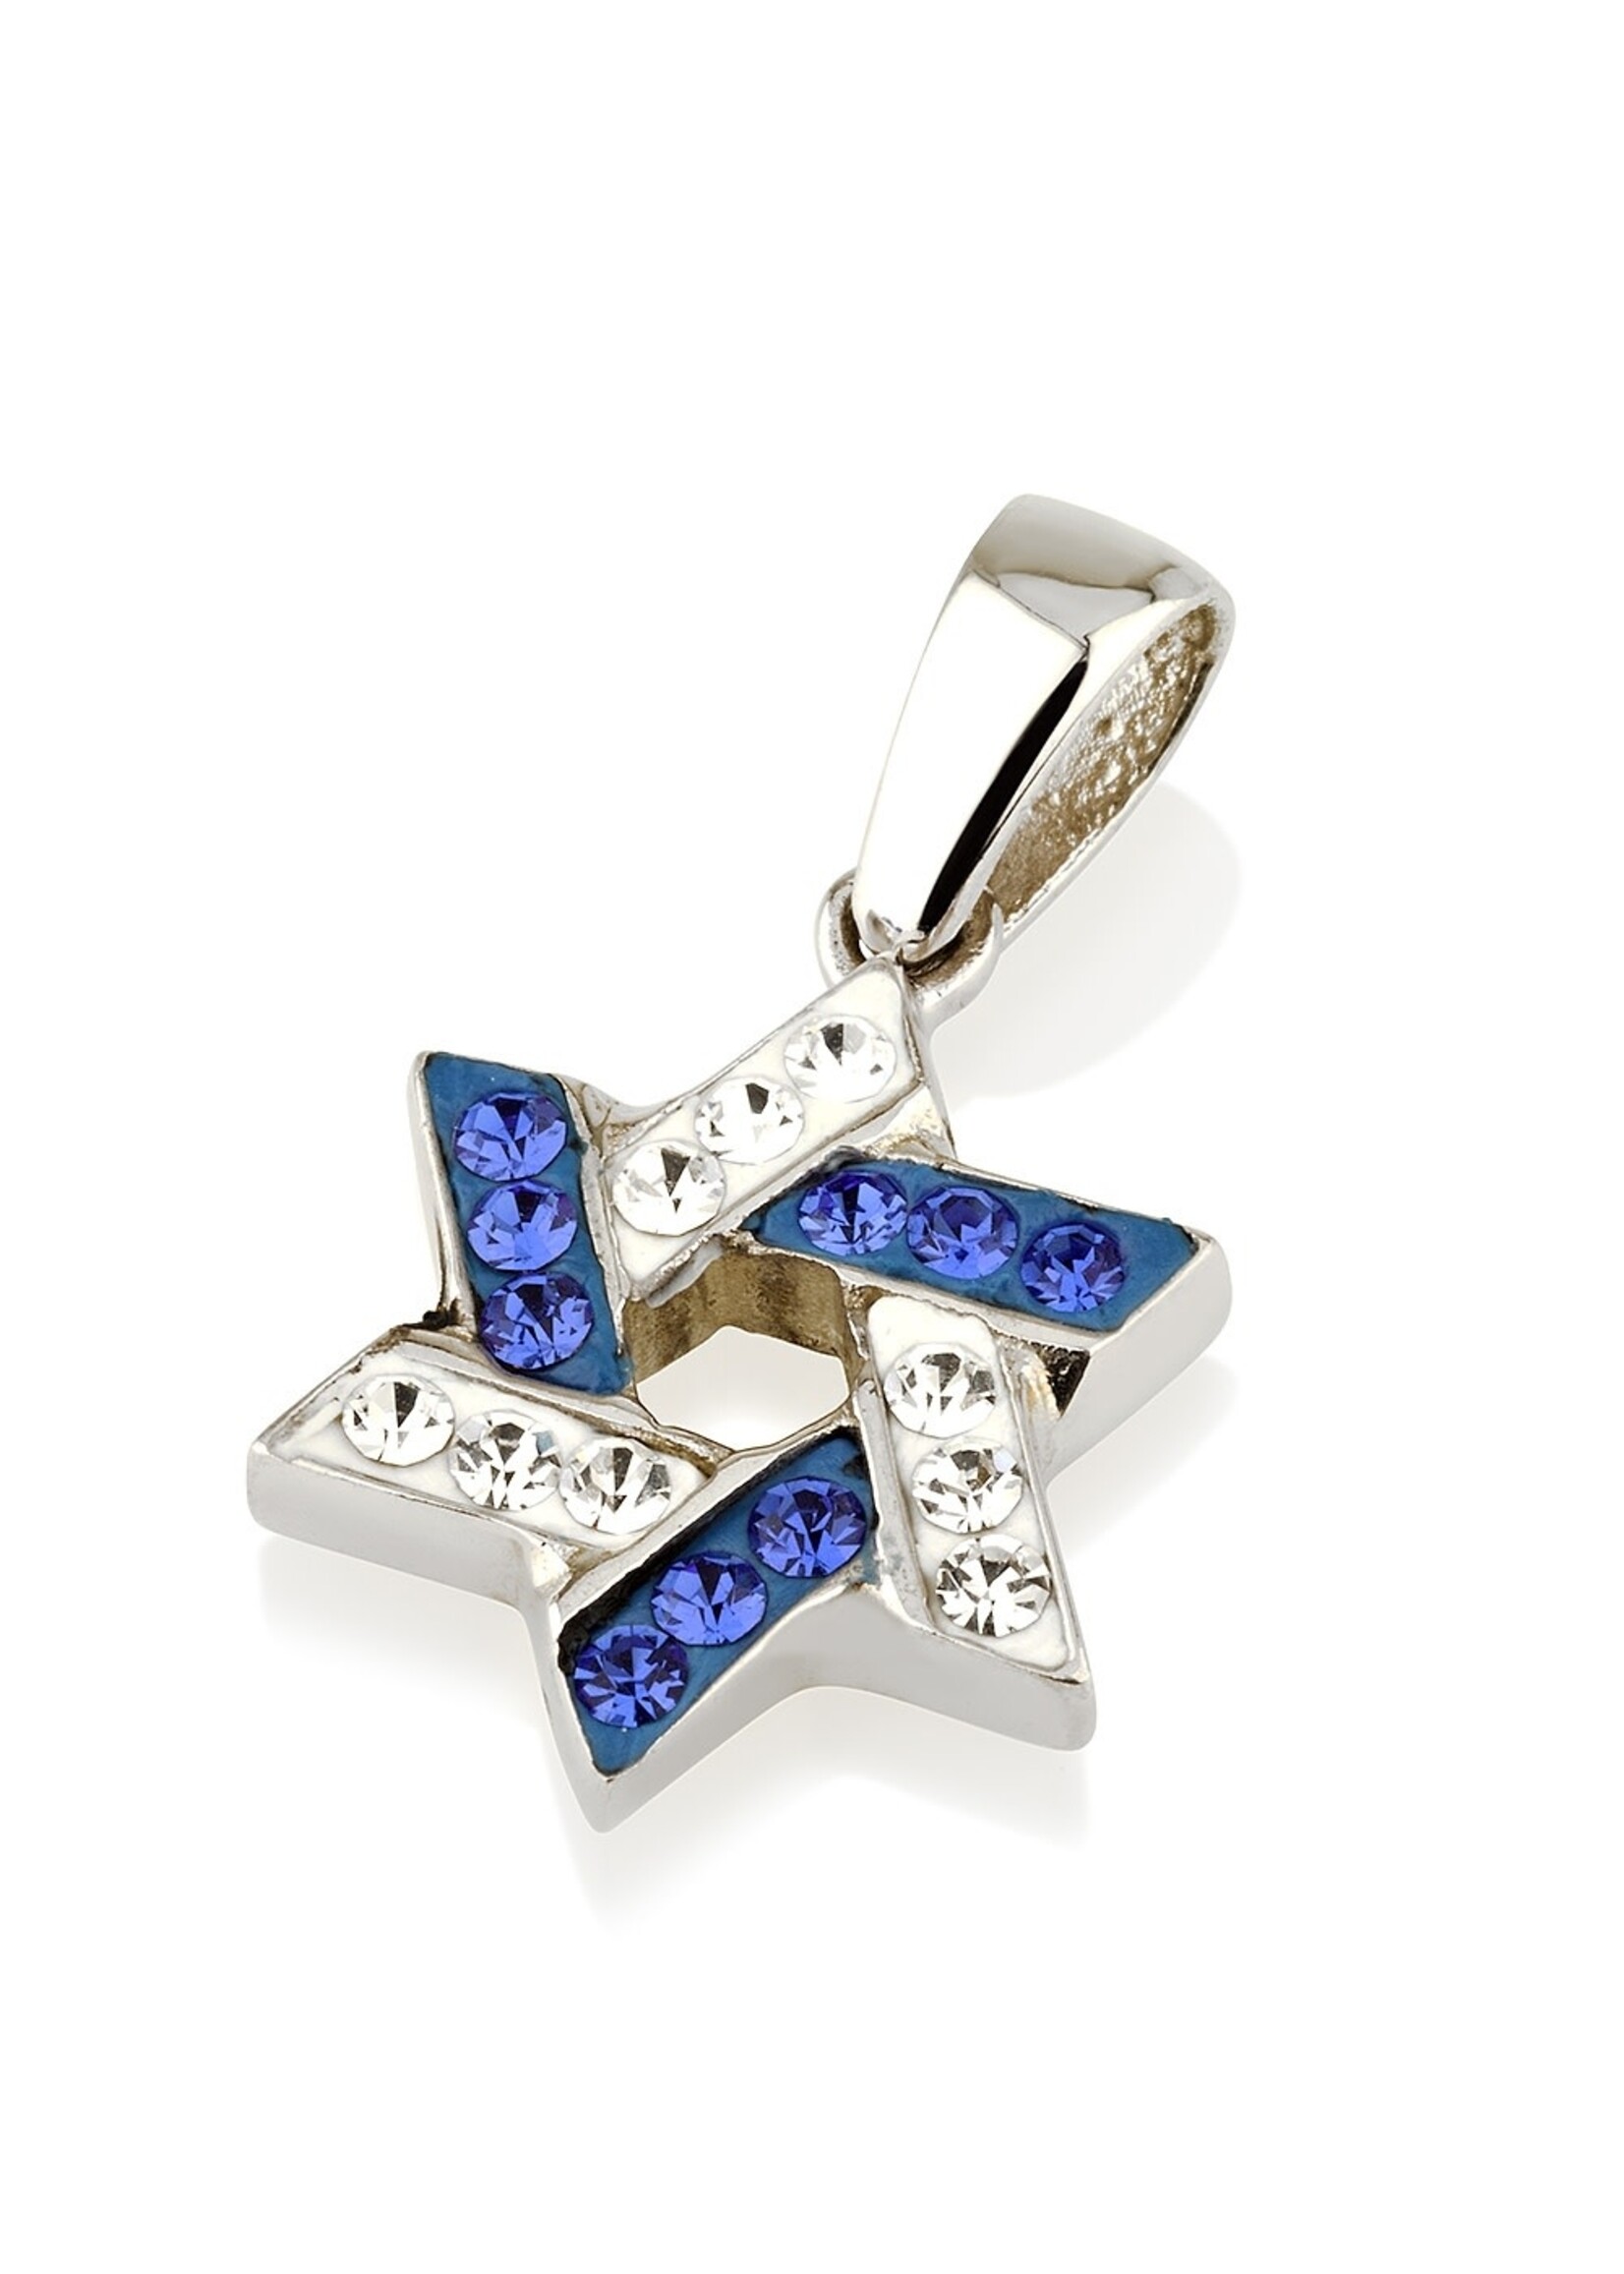 NECKLACE CRYSTAL BLUE AND SLVER STAR OF DAVID PENDANT